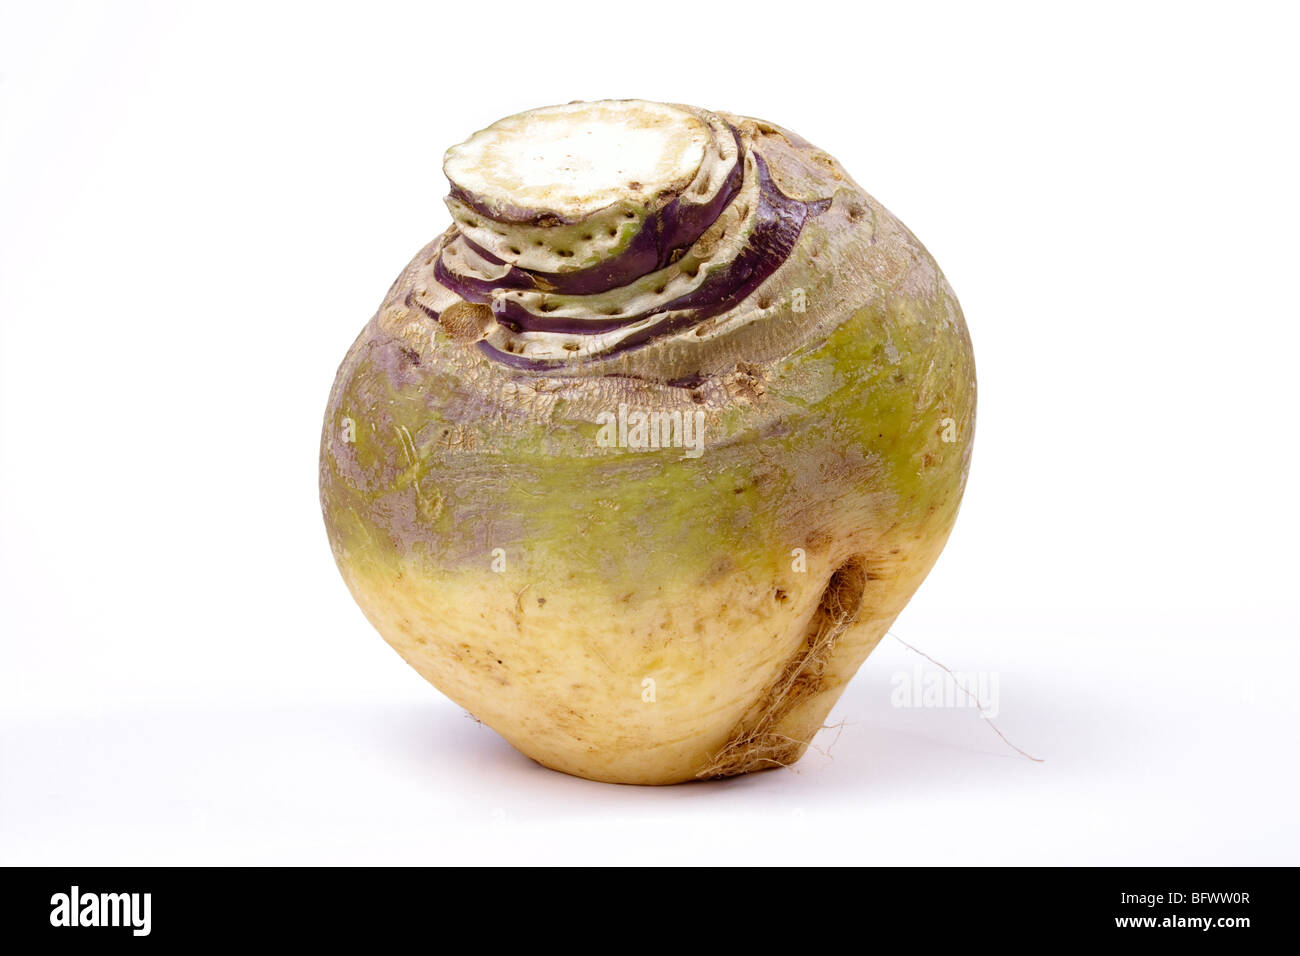 Swede or turnip isolated against white background. Stock Photo